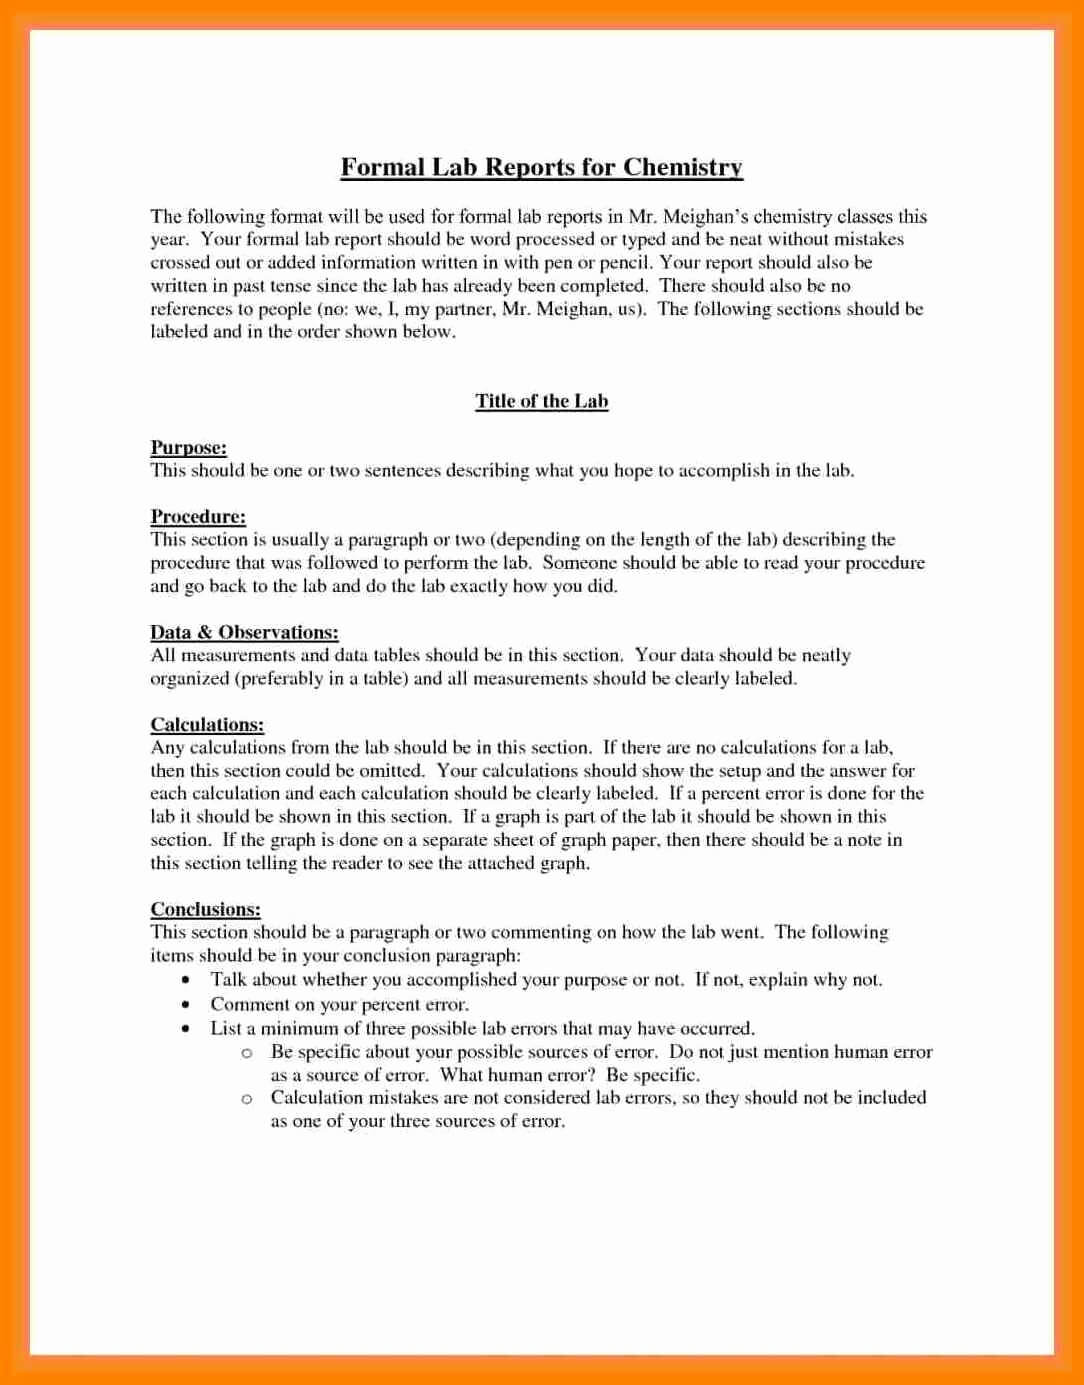 003 Formal Lab Report Example Best Write Up Template Of Throughout Chemistry Lab Report Template